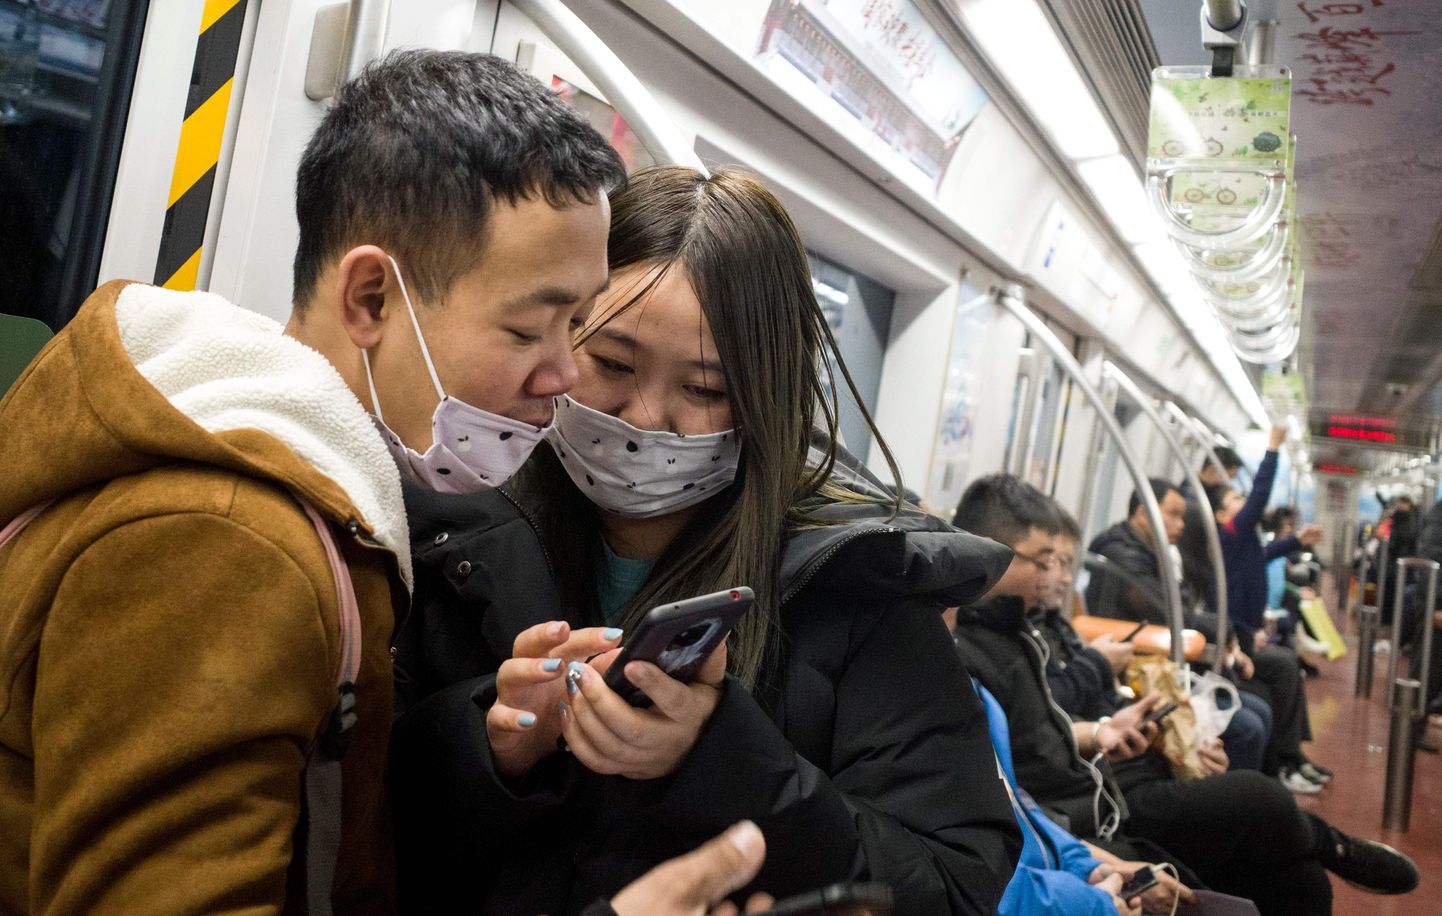 Subway passengers wear protective masks in Beijing on January 21, 2020. - The death toll from a new China virus that is transmissible between humans rose to six, the mayor of Wuhan said in an interview with state broadcaster CCTV on January 21, as the World Health Organization said it would consider declaring an international public health emergency over the outbreak. (Photo by NOEL CELIS / AFP)